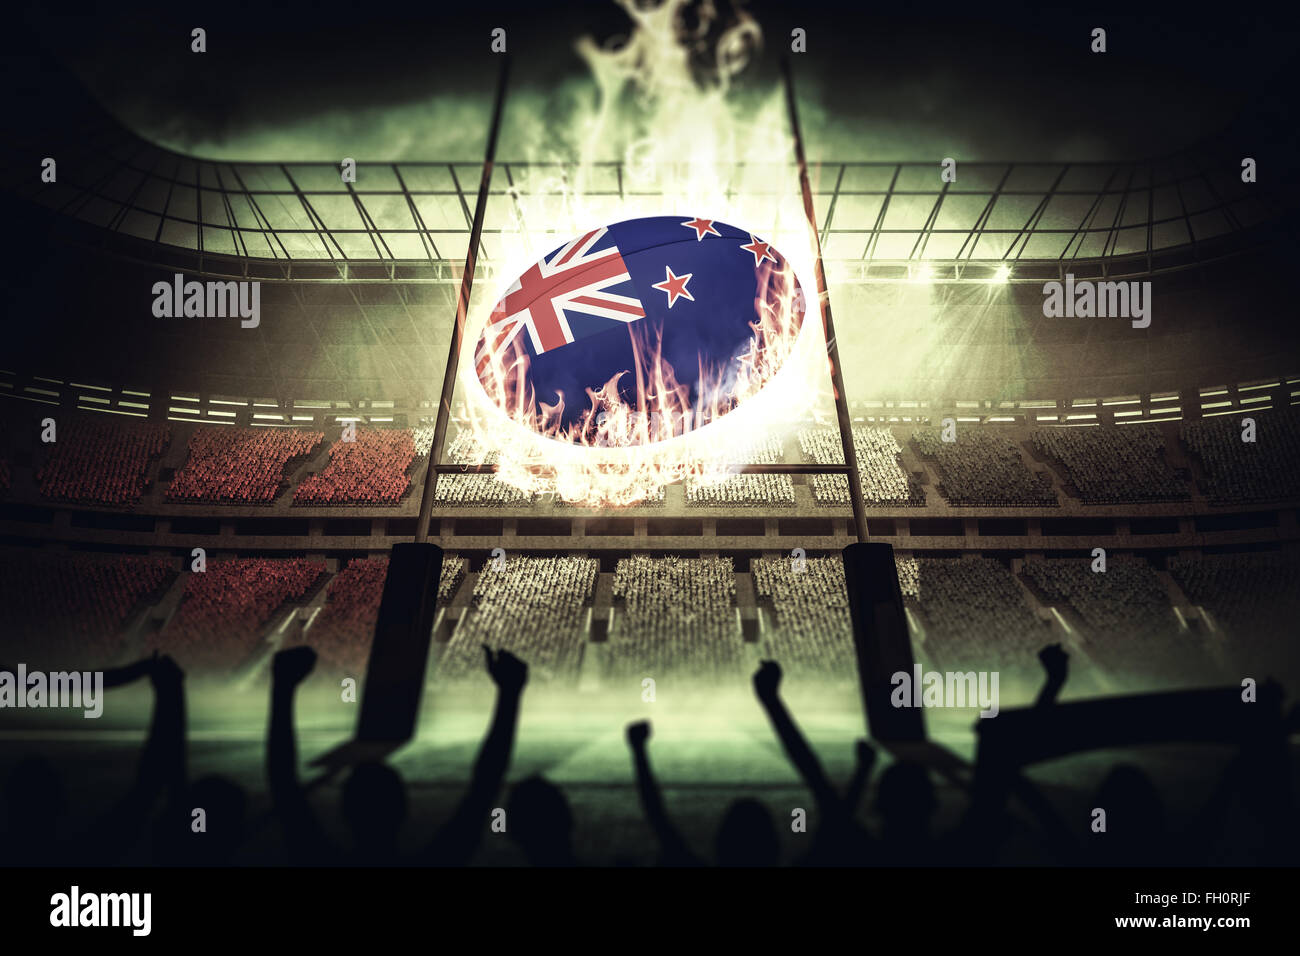 Composite image of silhouettes of football supporters Stock Photo